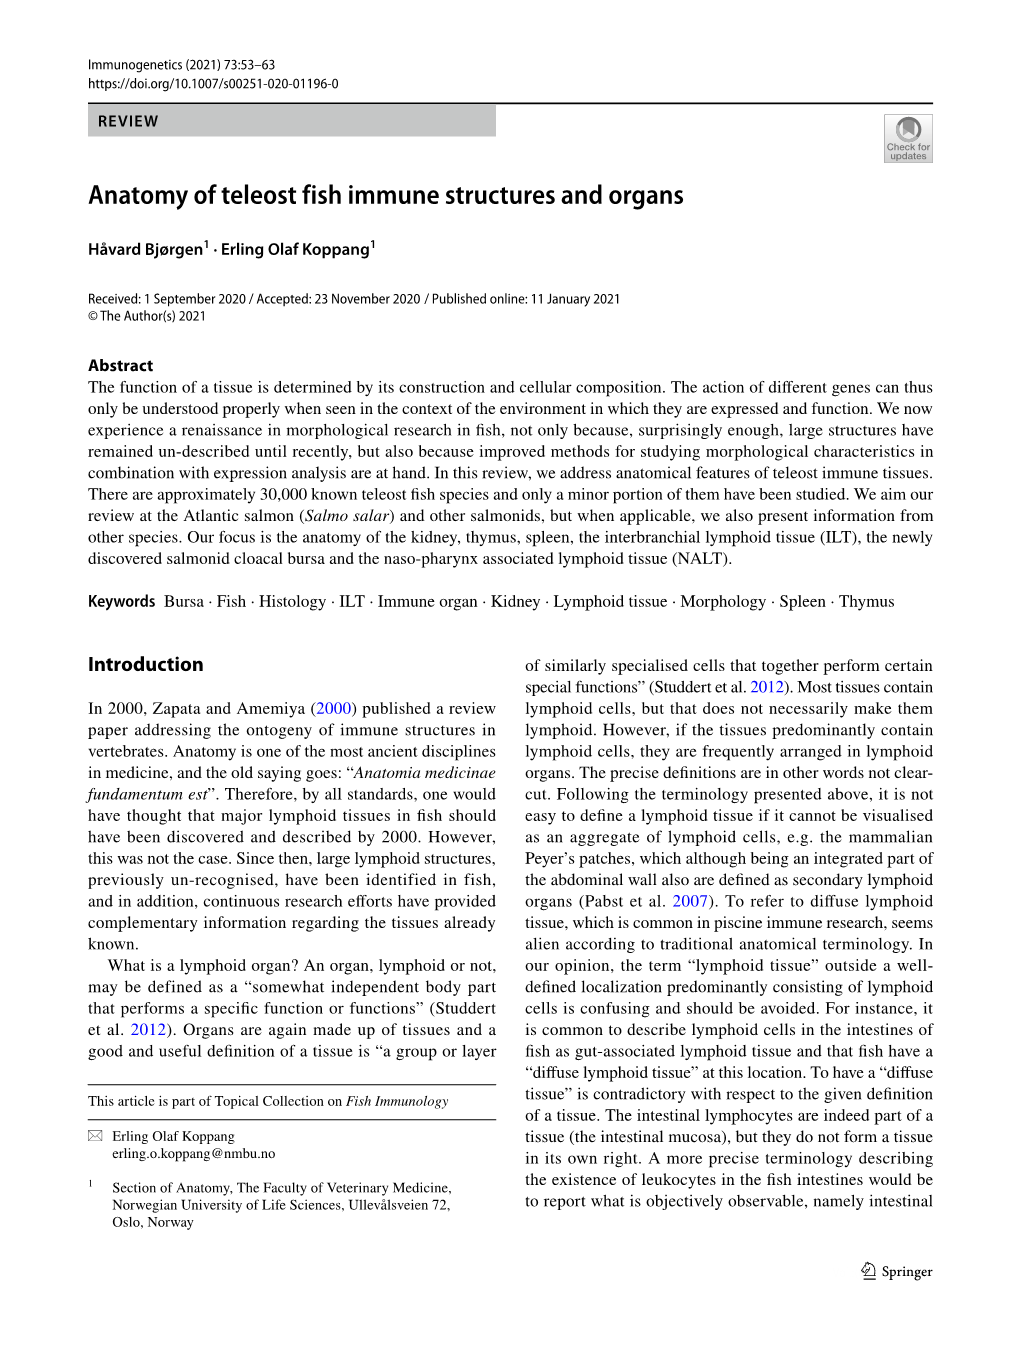 Anatomy of Teleost Fish Immune Structures and Organs